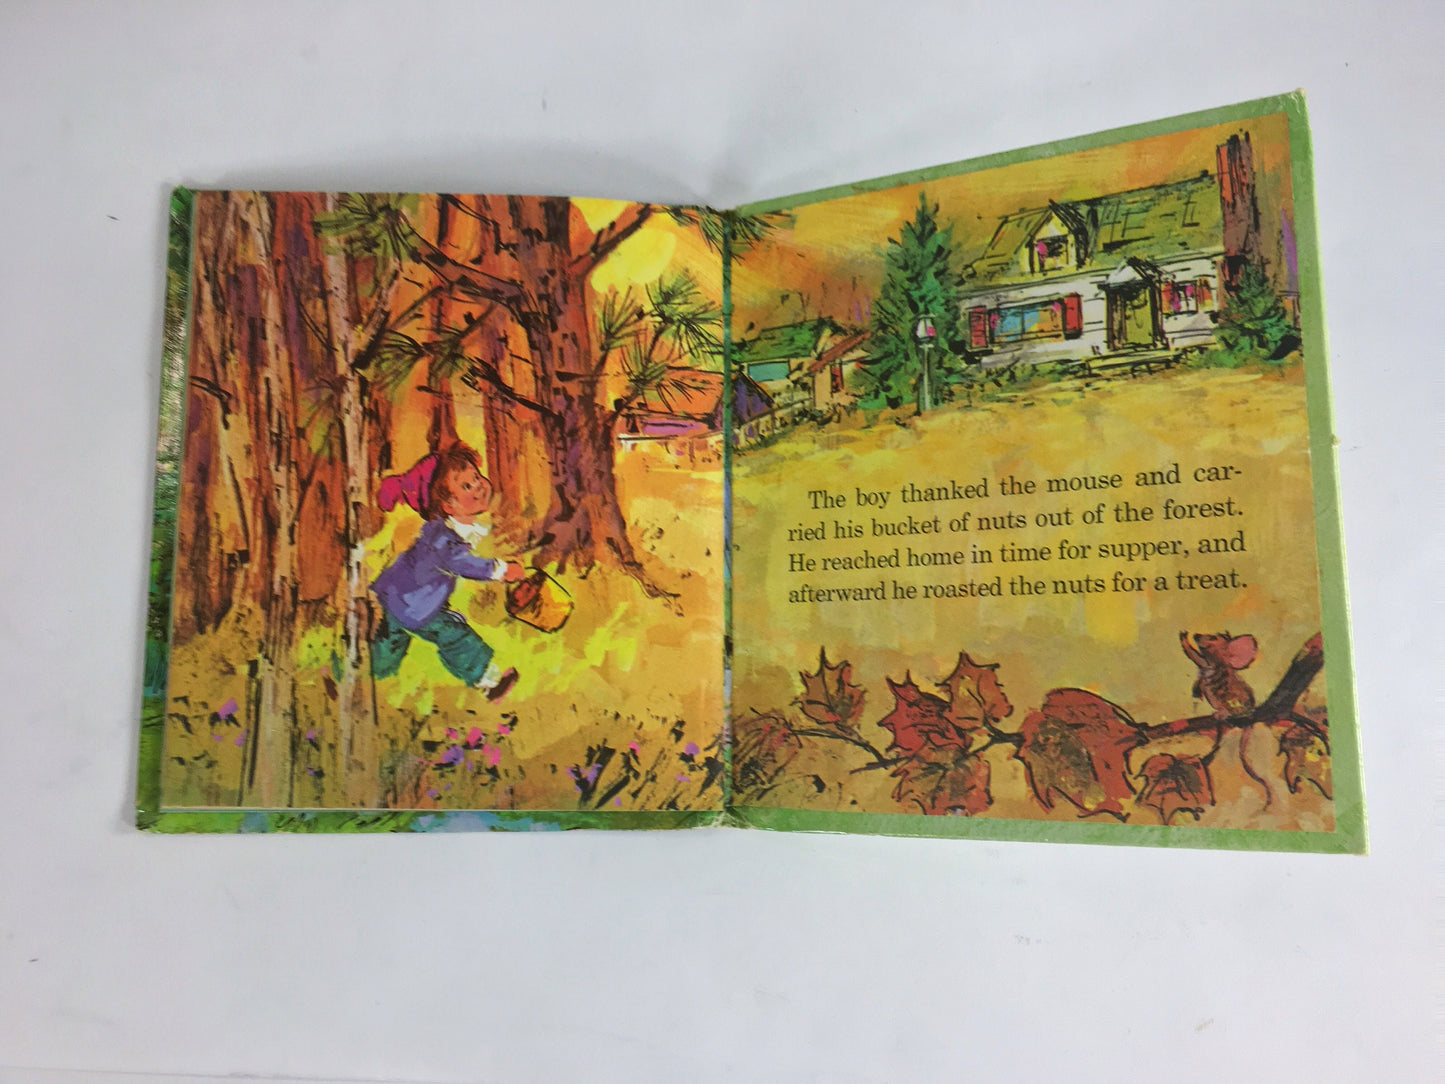 Little Boy in the Forest by David Harrison. Vintage Whitman Tell-a-Tale children's book circa 1969. Animals help the lost boy find home.